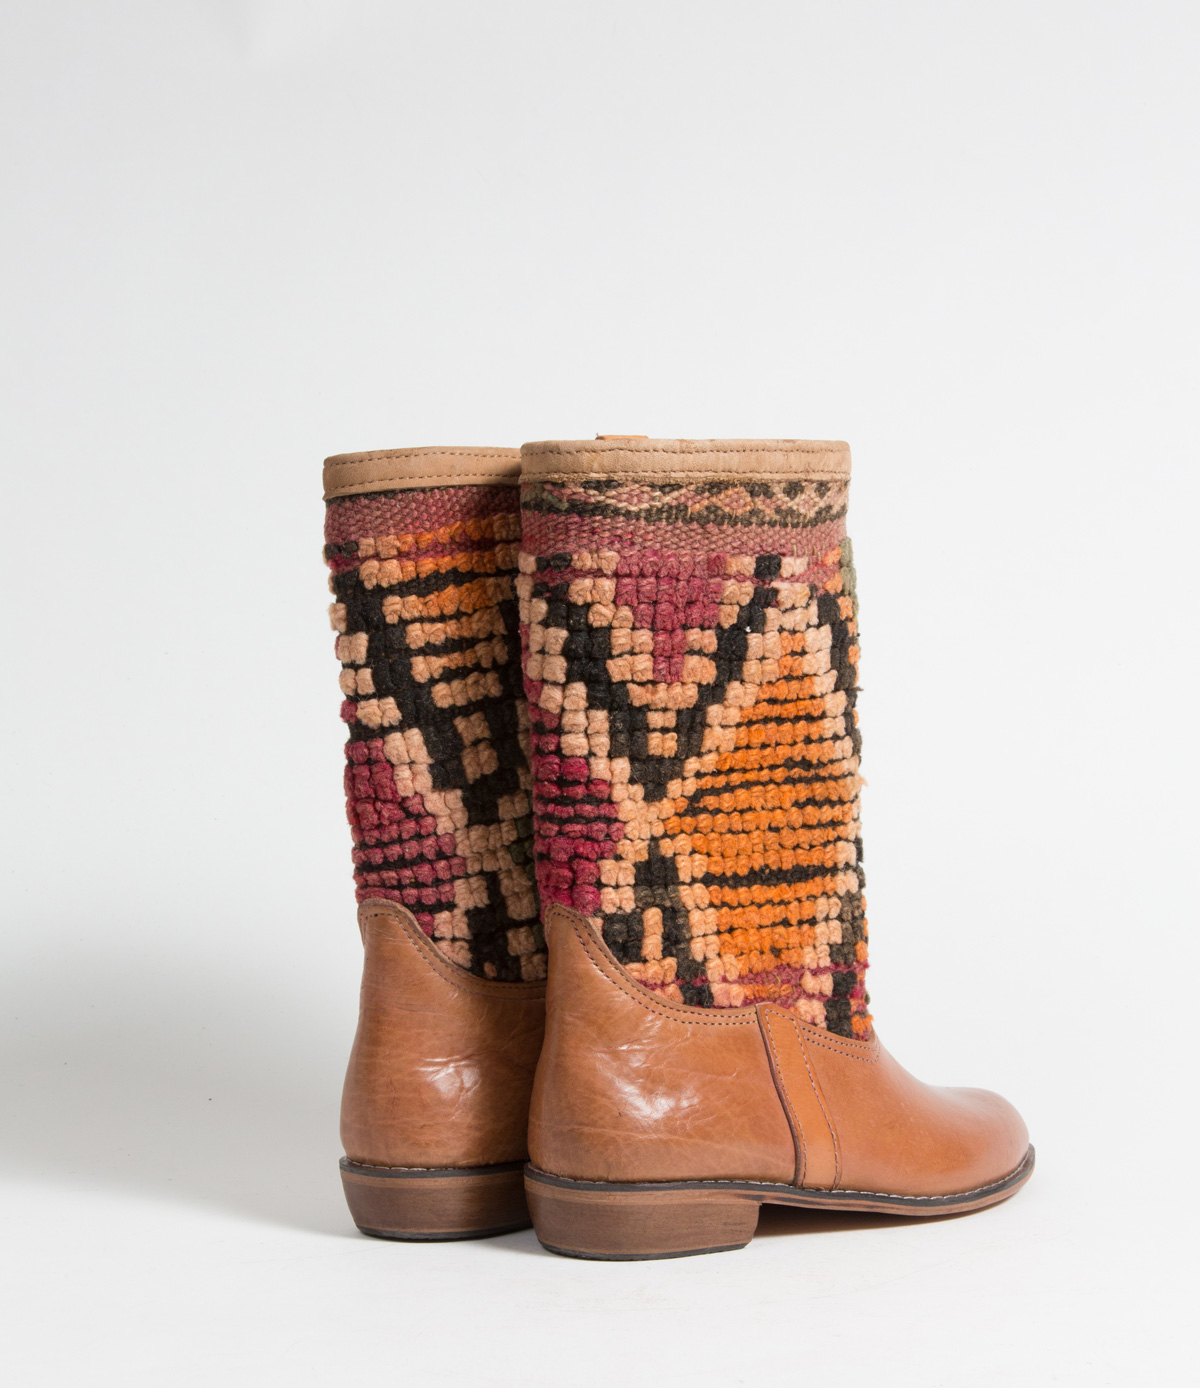 Bottes Kilim cuir mababouche artisanales (Réf. GL4-40)